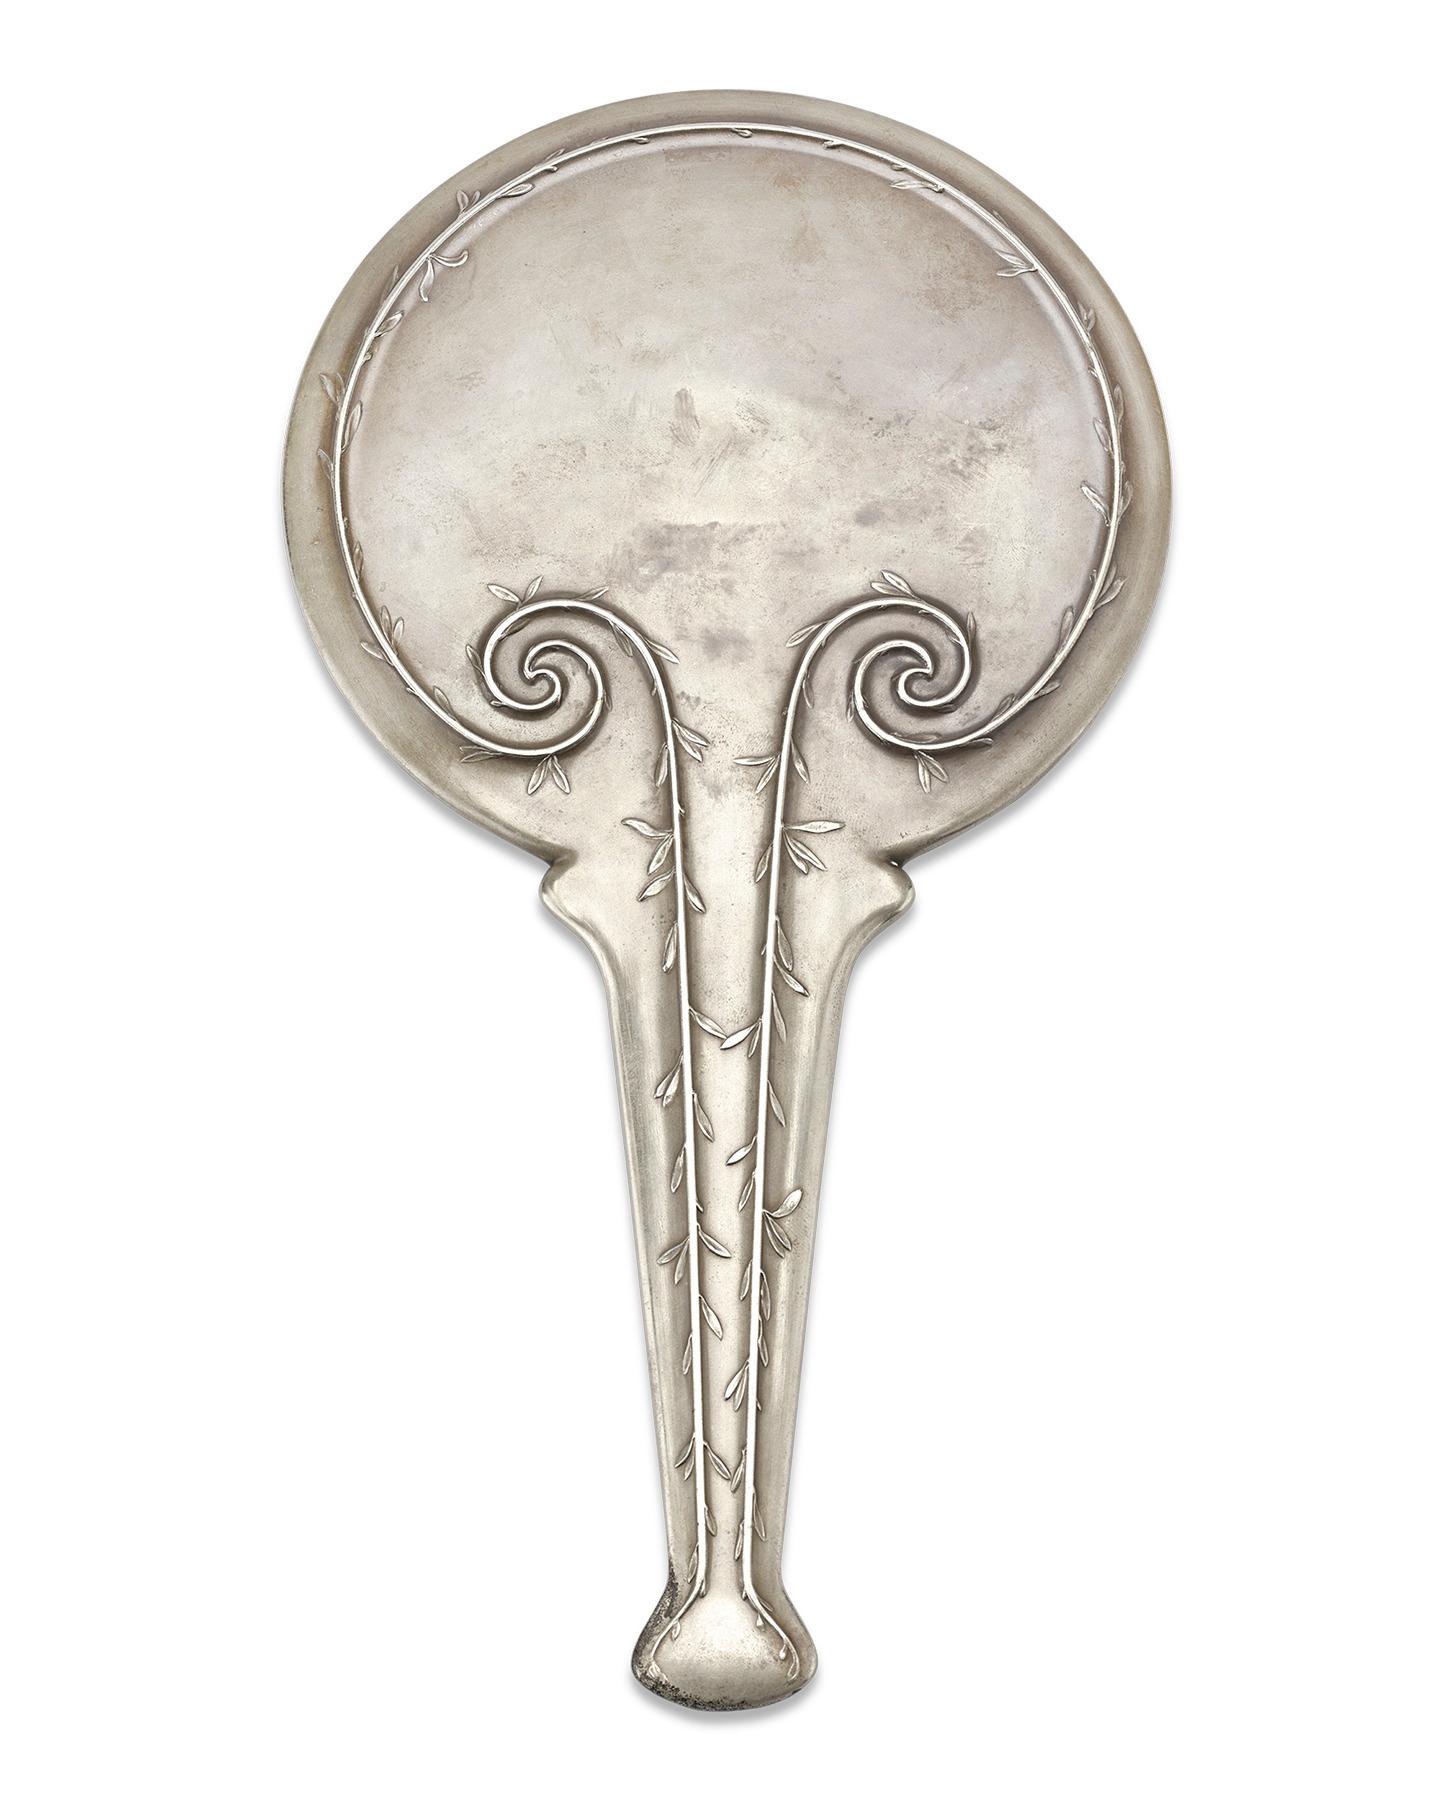 This absolutely exquisite Deux figurines hand mirror was crafted by the legendary French glassmaker René Lalique. The masterfully designed Art Deco creation is formed from silverplate and frosted glass, the medium that made Lalique famous. Two nudes